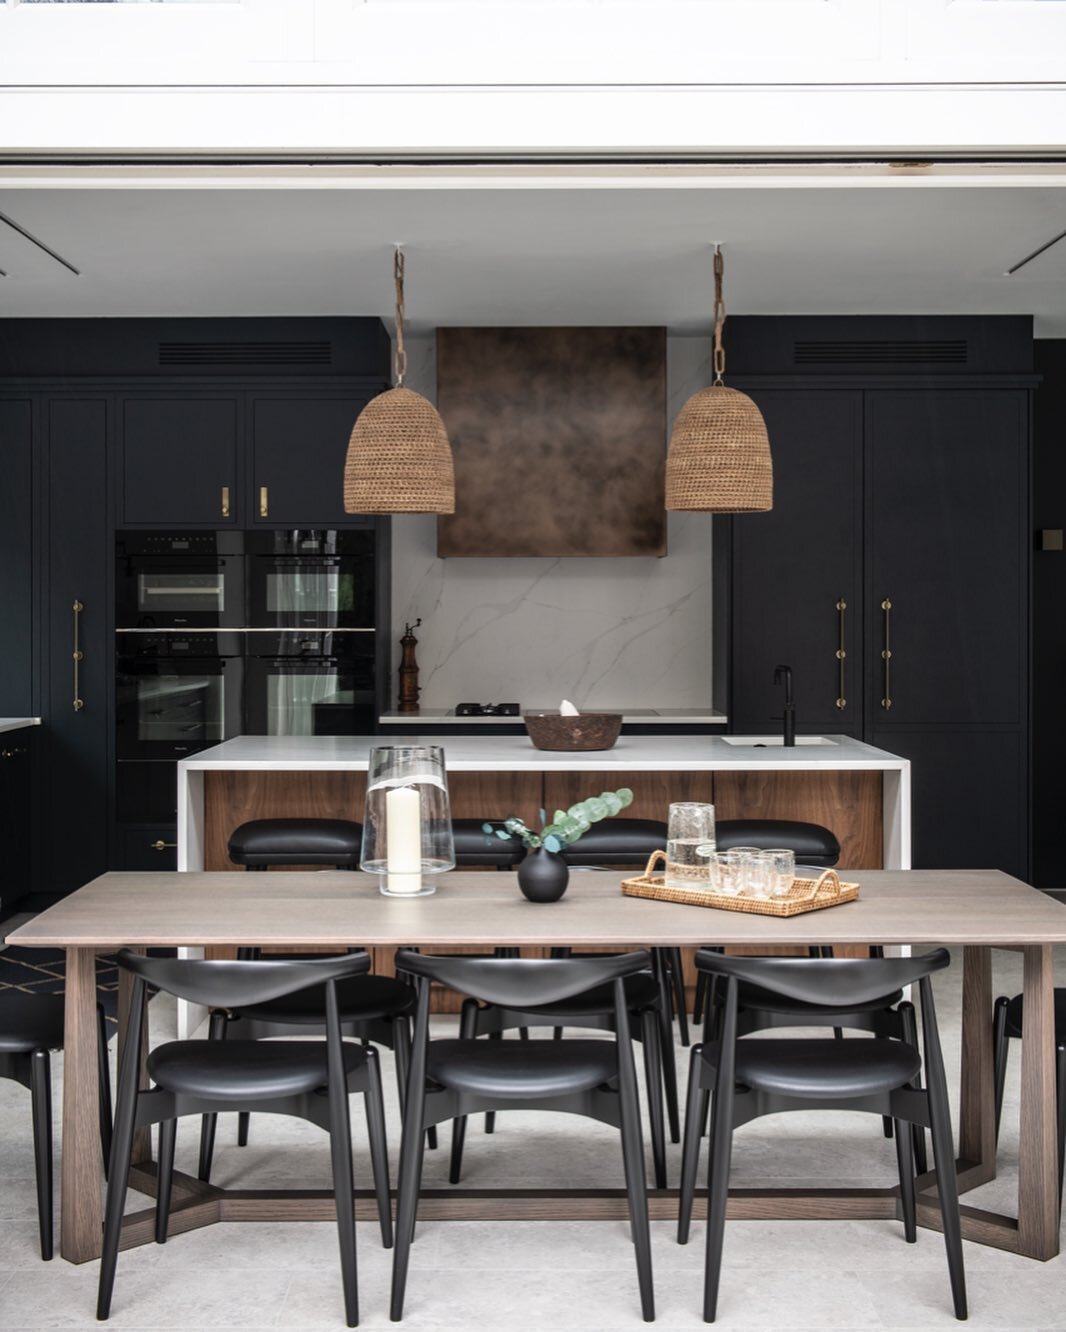 We love the symmetry in this Hampstead kitchen lining up beautifully. Wood, metal, brass and woven natural rope detail on the lighting creates an interesting range of finishes for this contemporary space. .  Interiors @schillerbeynoninteriors archite